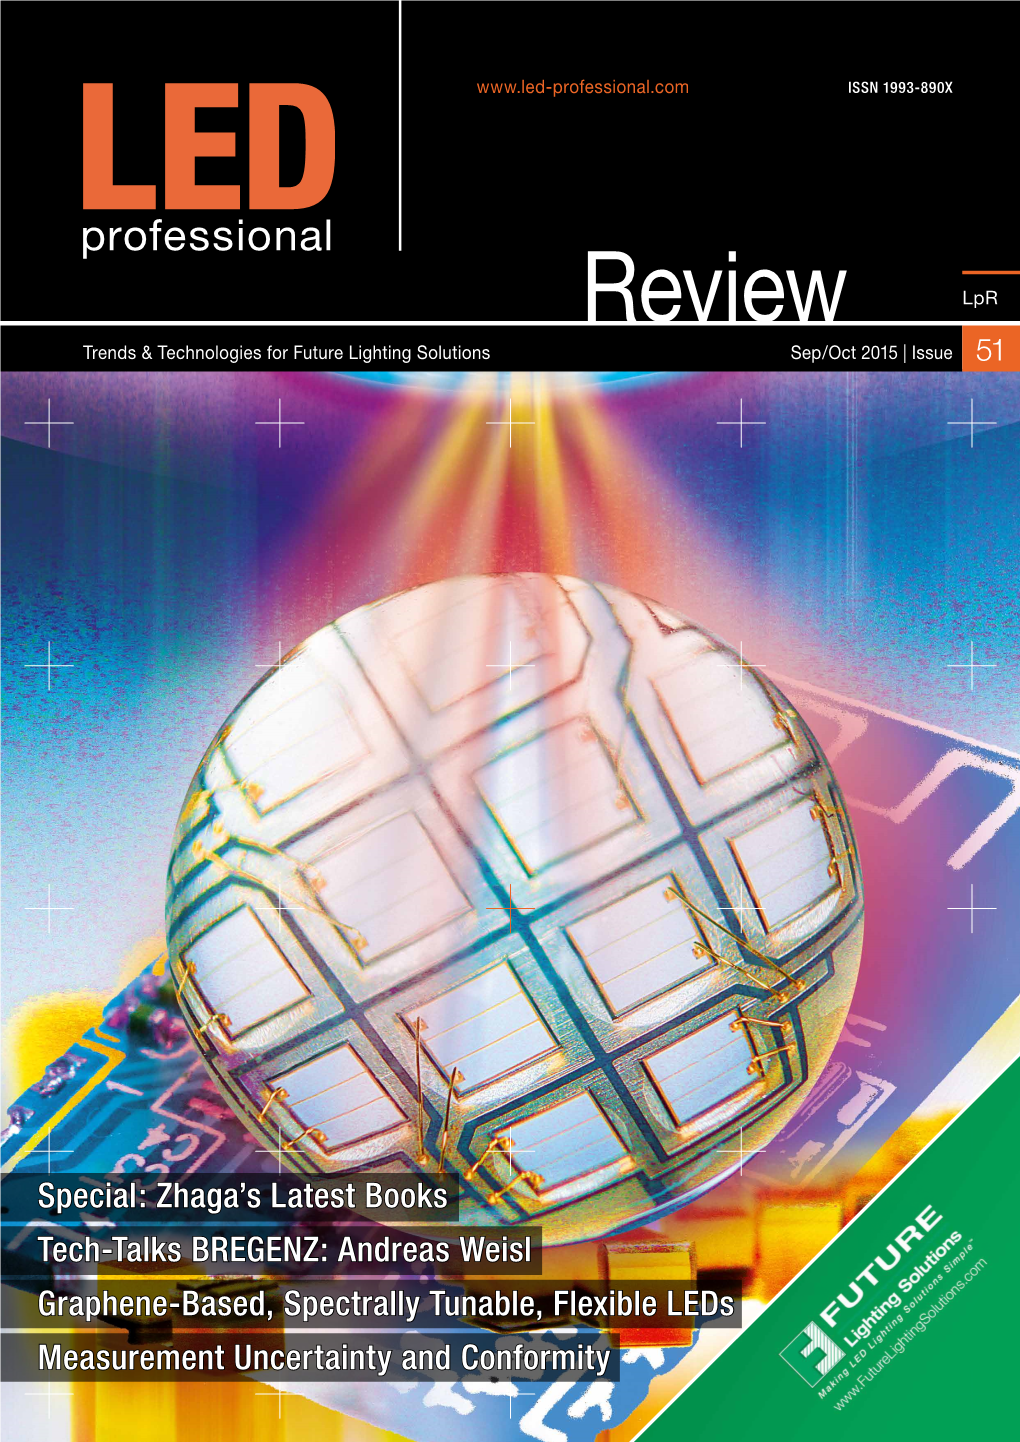 Review Lpr Trends & Technologies for Future Lighting Solutions Sep/Oct 2015 | Issue 51